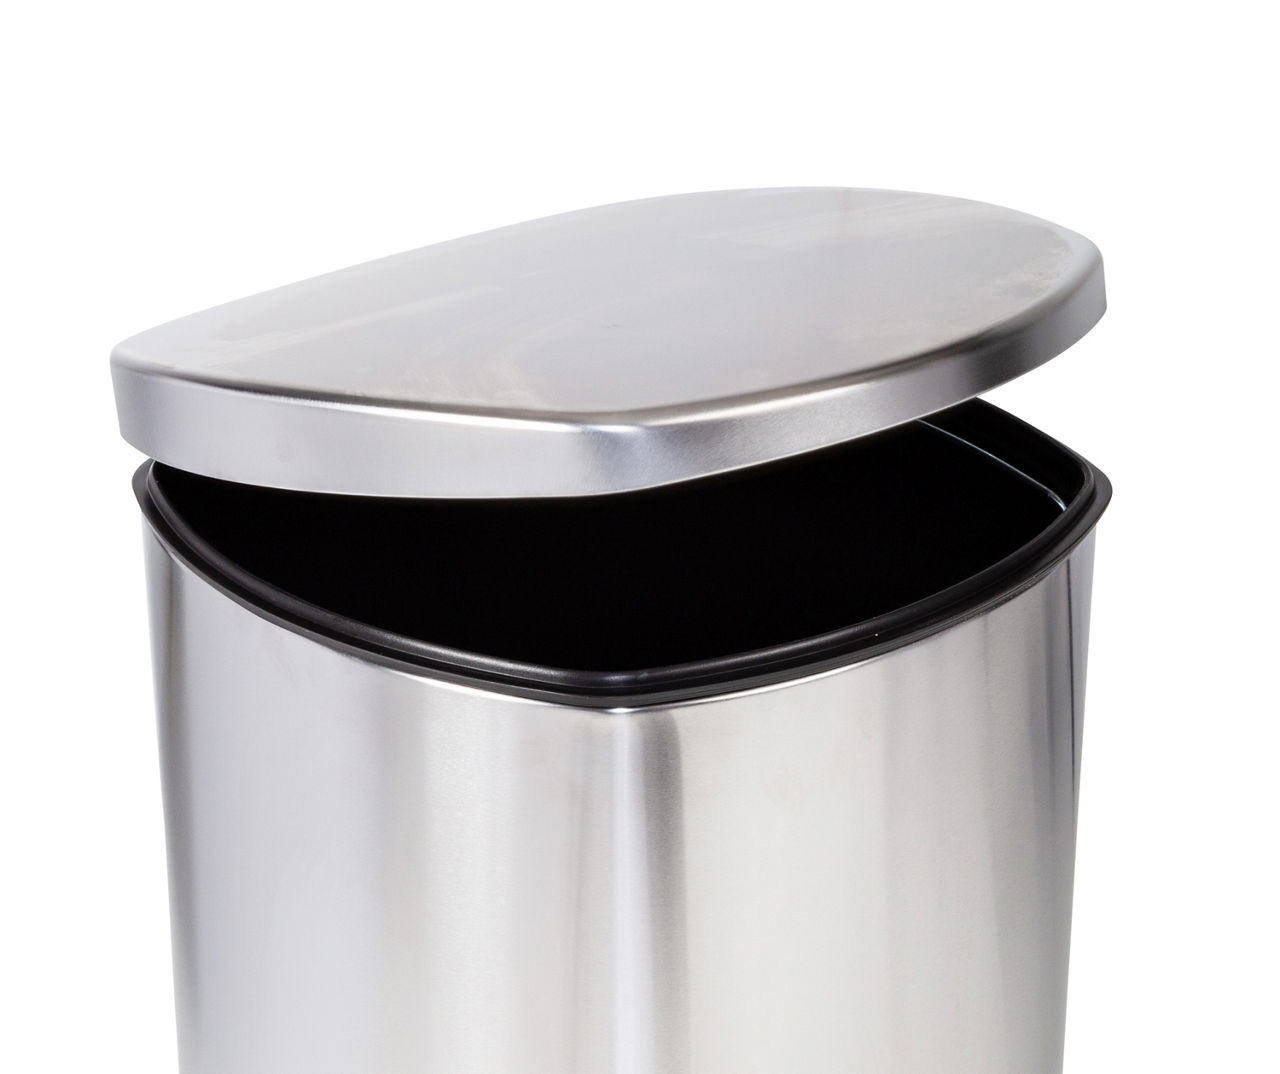 Fingerhut - Honey-Can-Do Stainless Steel Step 13-Gallon Trash Can with Lid